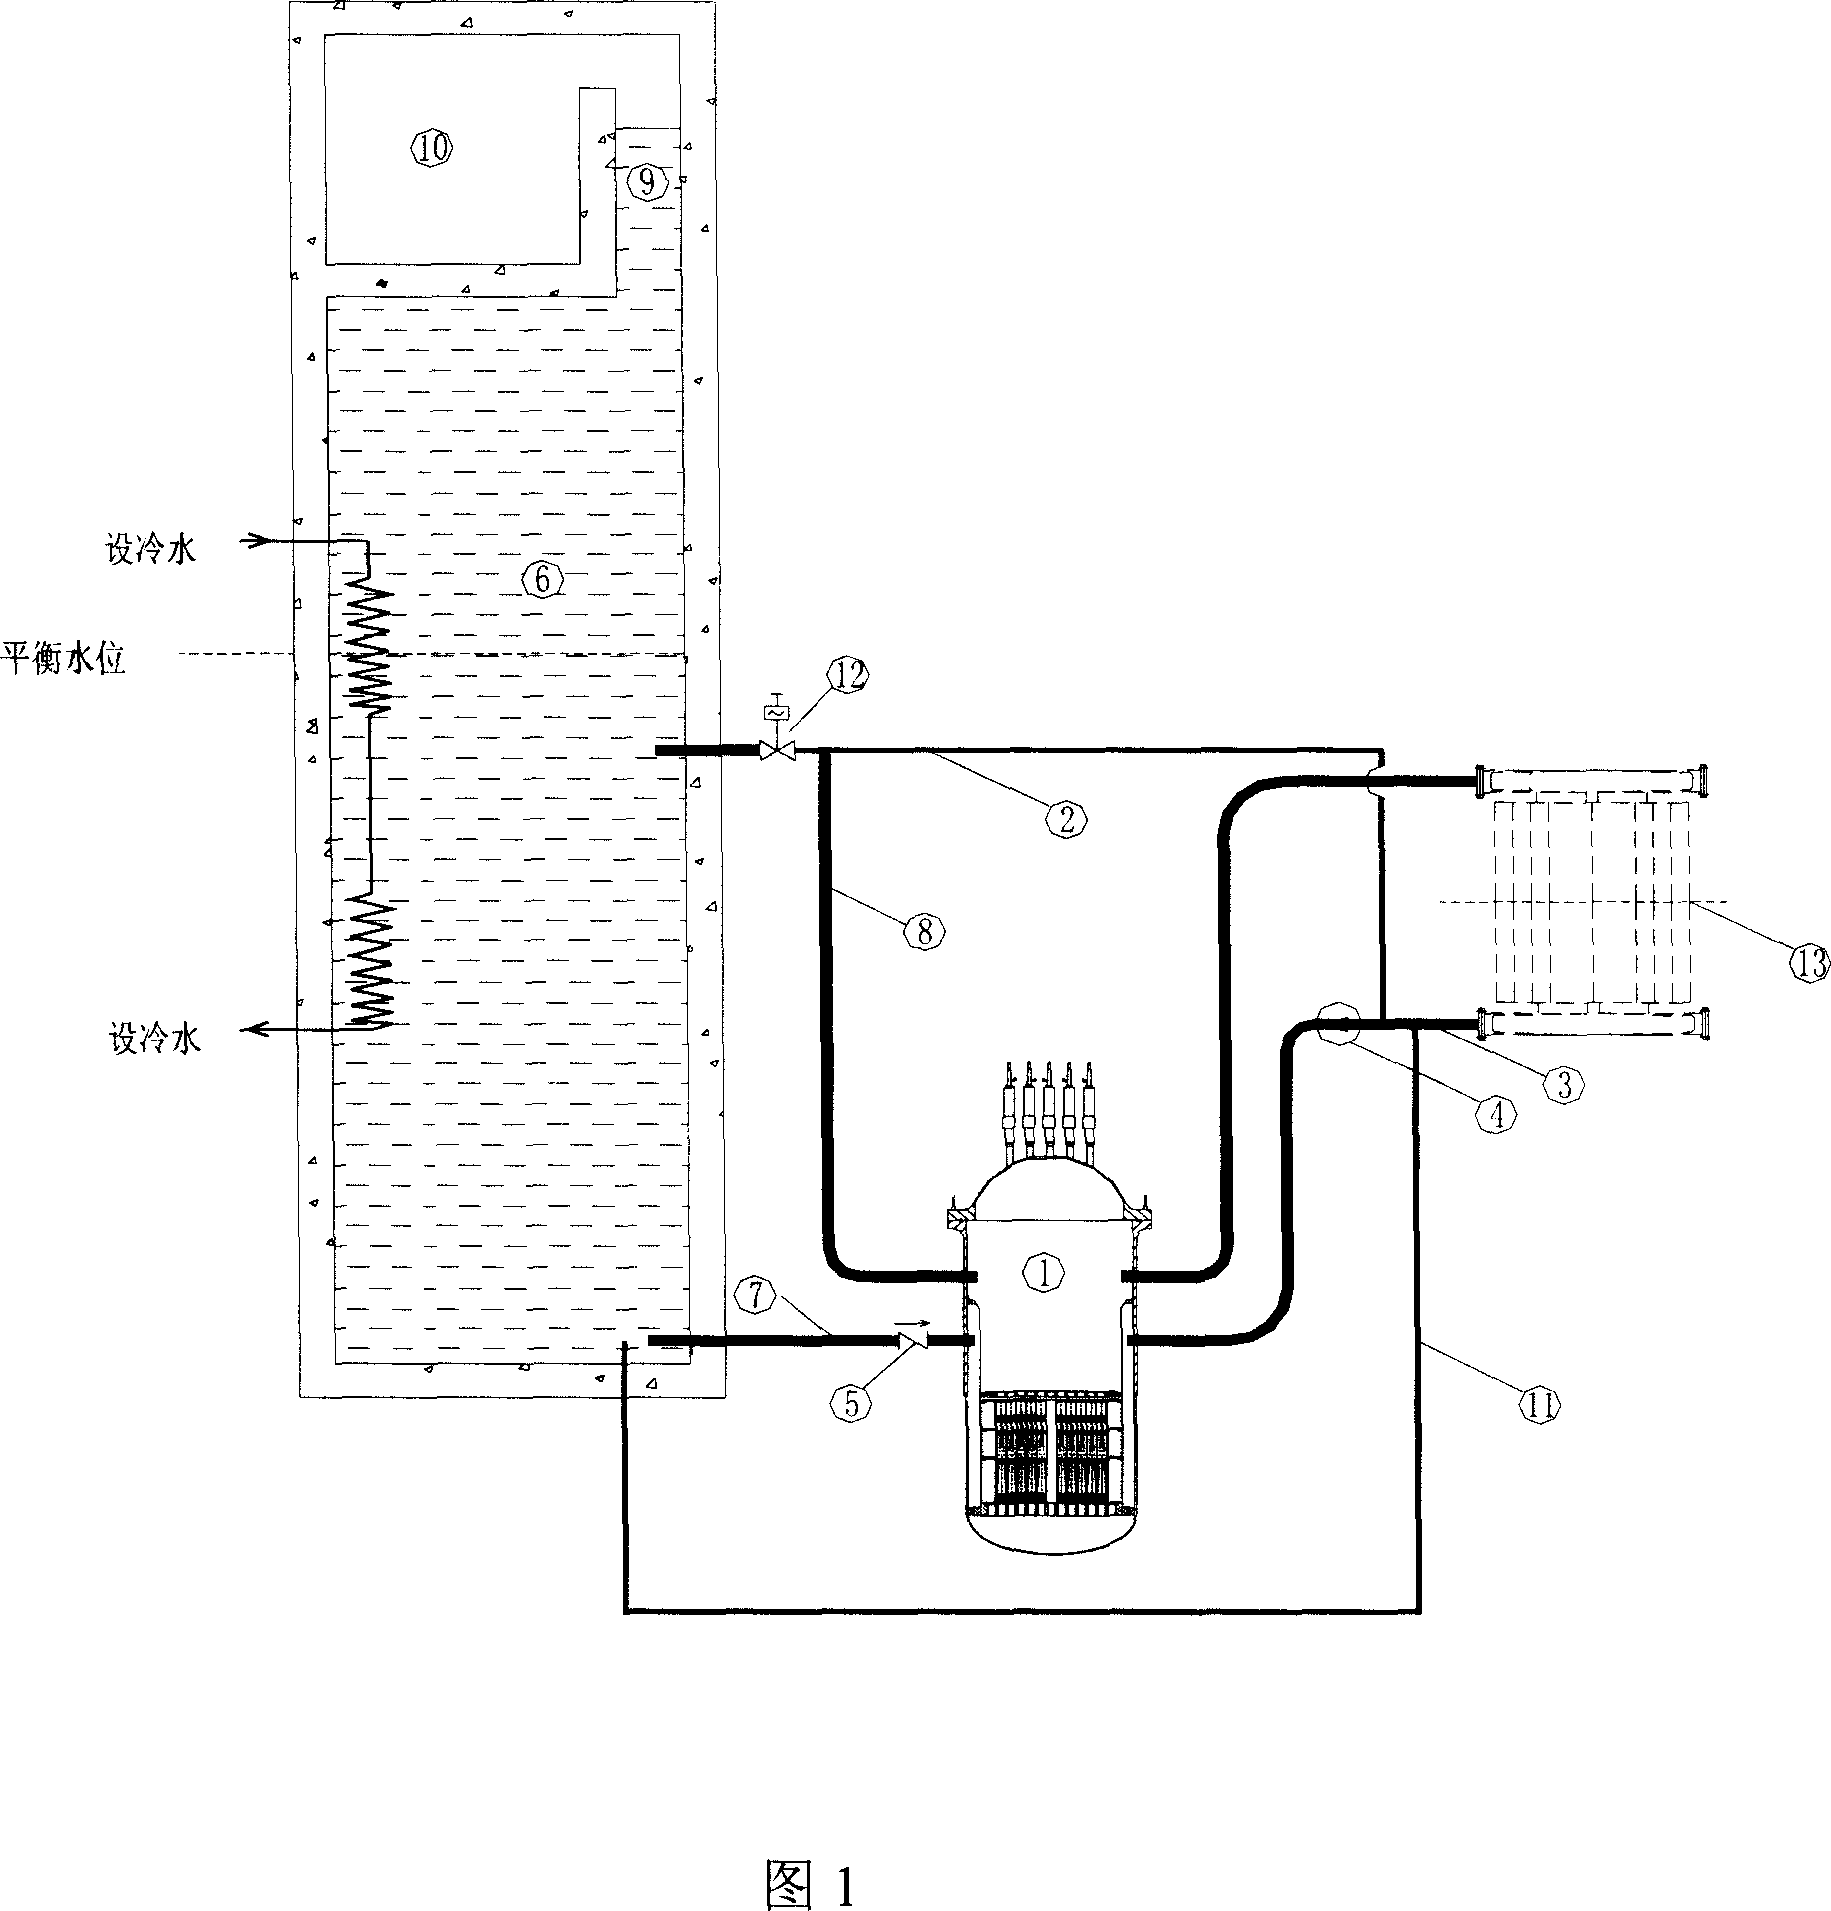 Nuclear reactor non-energy and multi-function pool voltage-stabling system